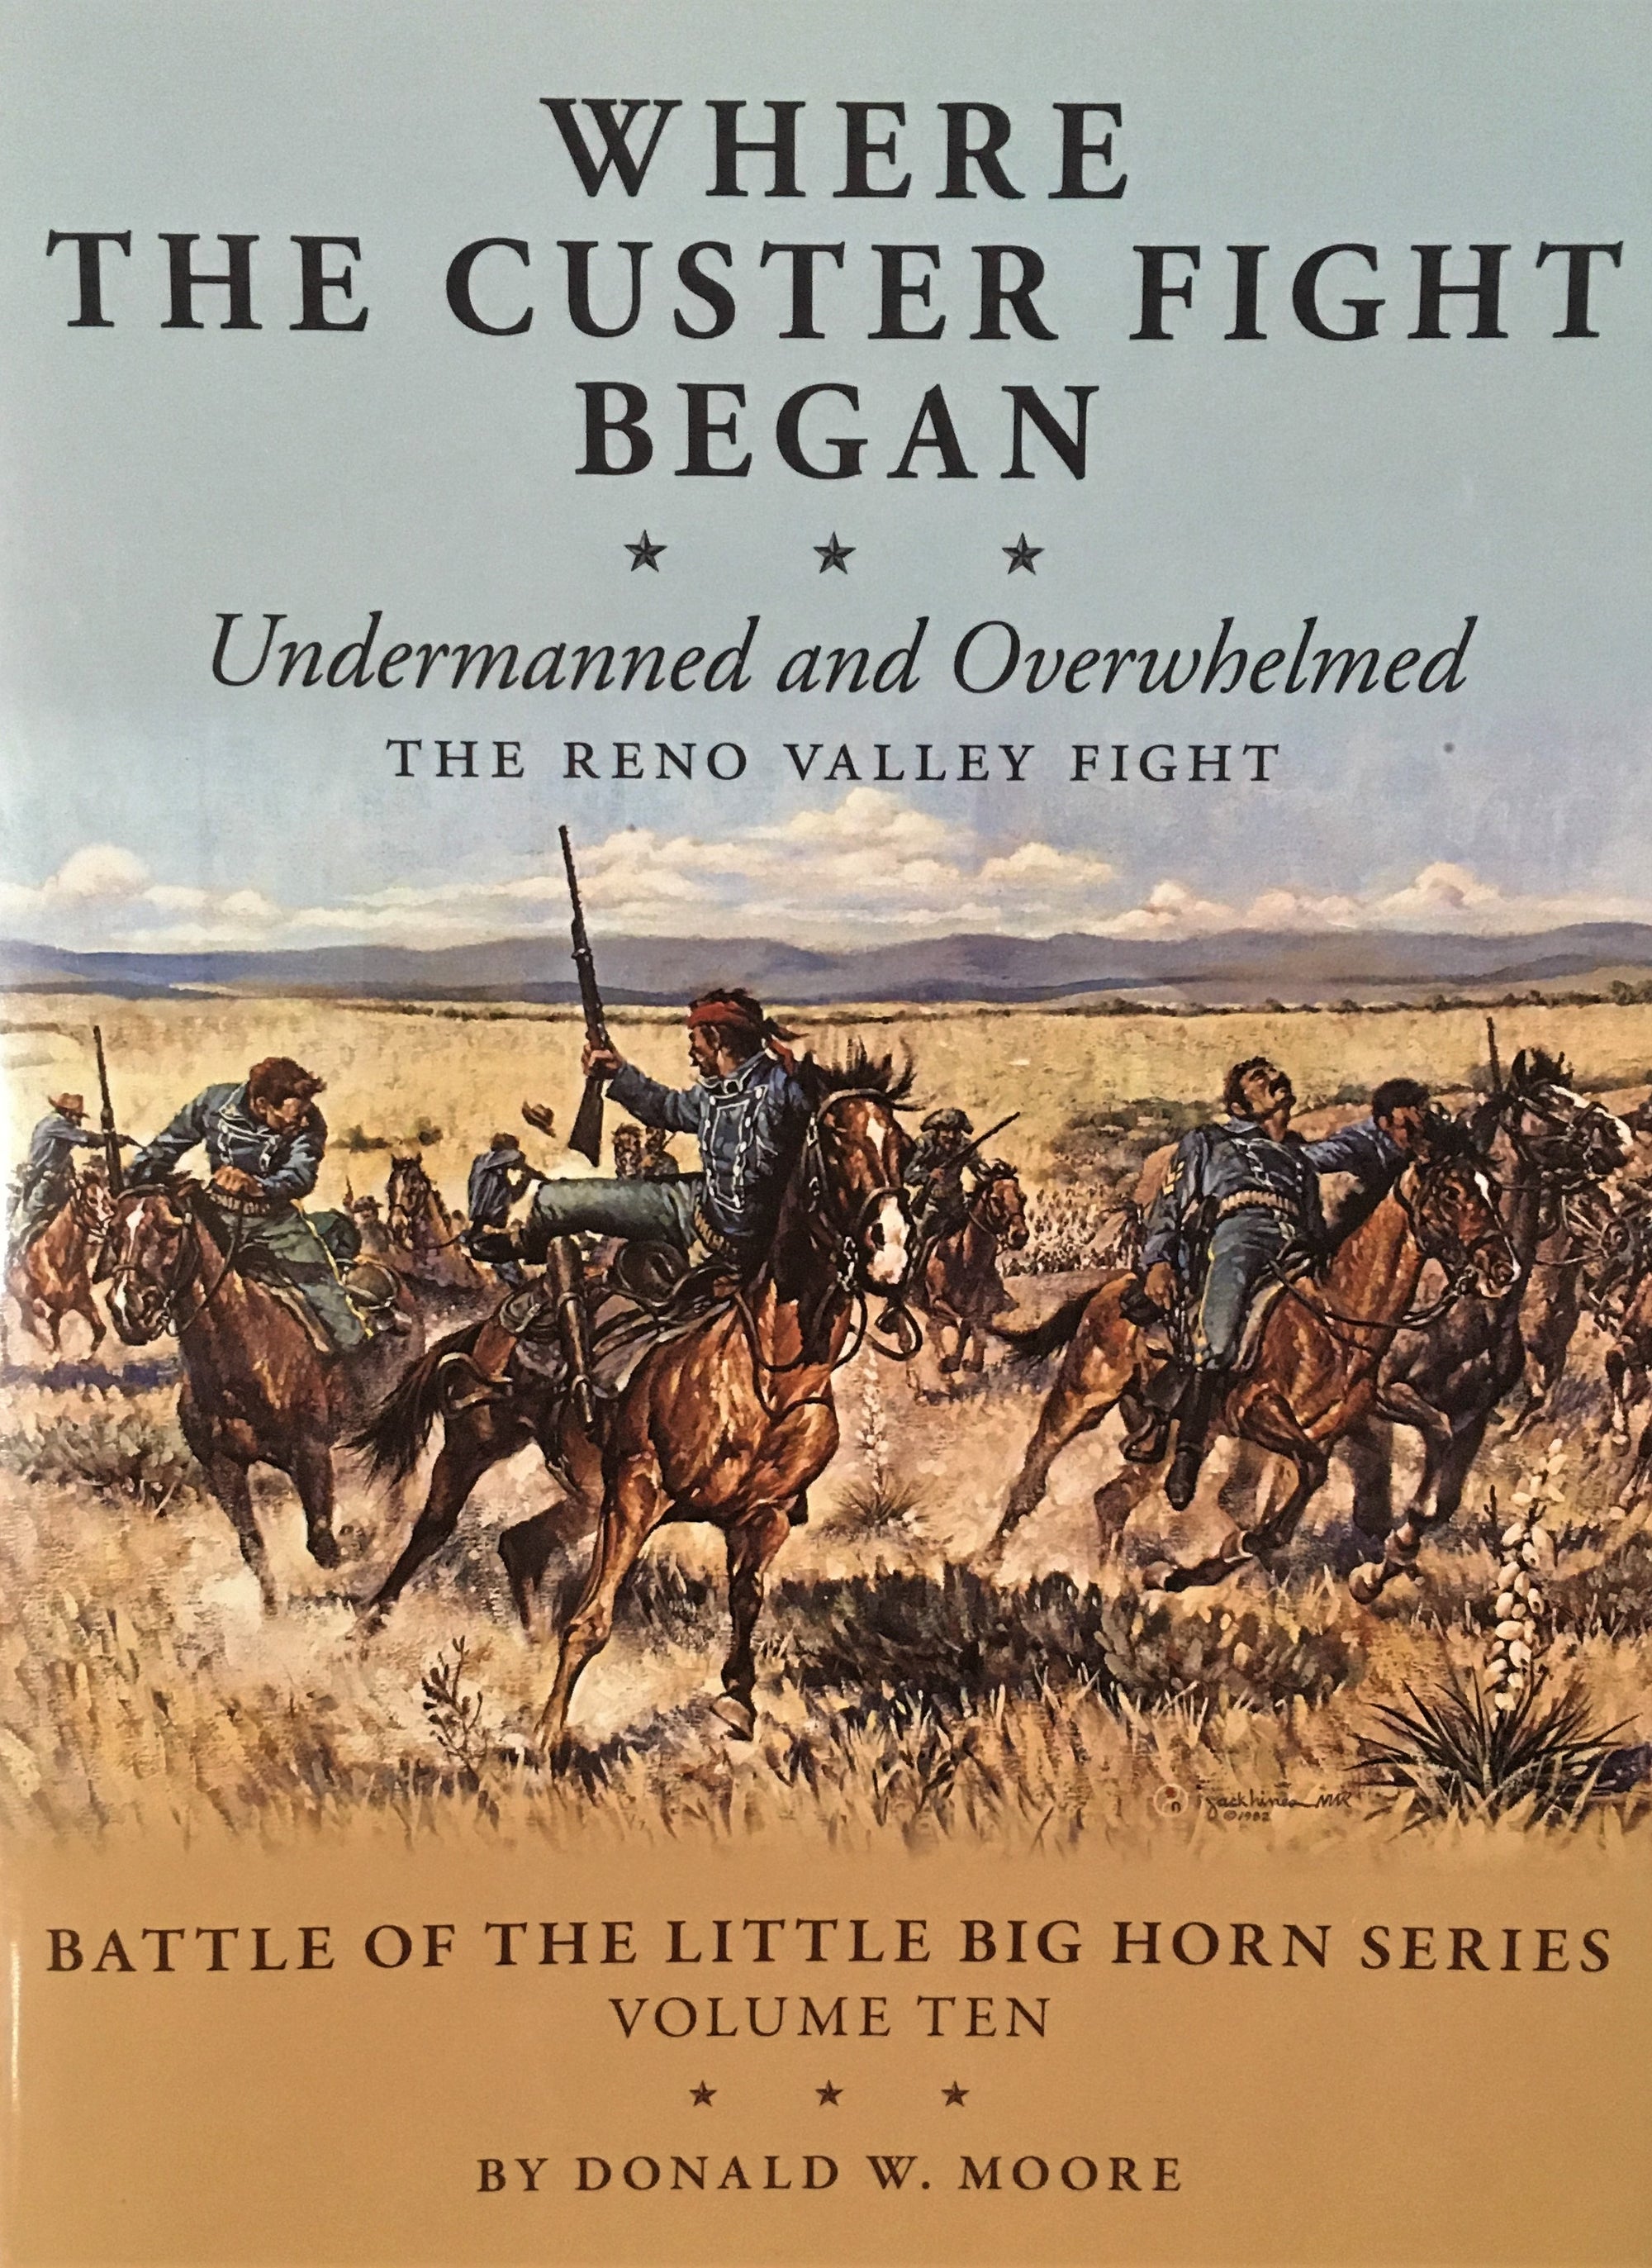 Where The Custer Fight Began: Undermanned and Overwhelmed The Reno Valley Fight by Donald W. Moore